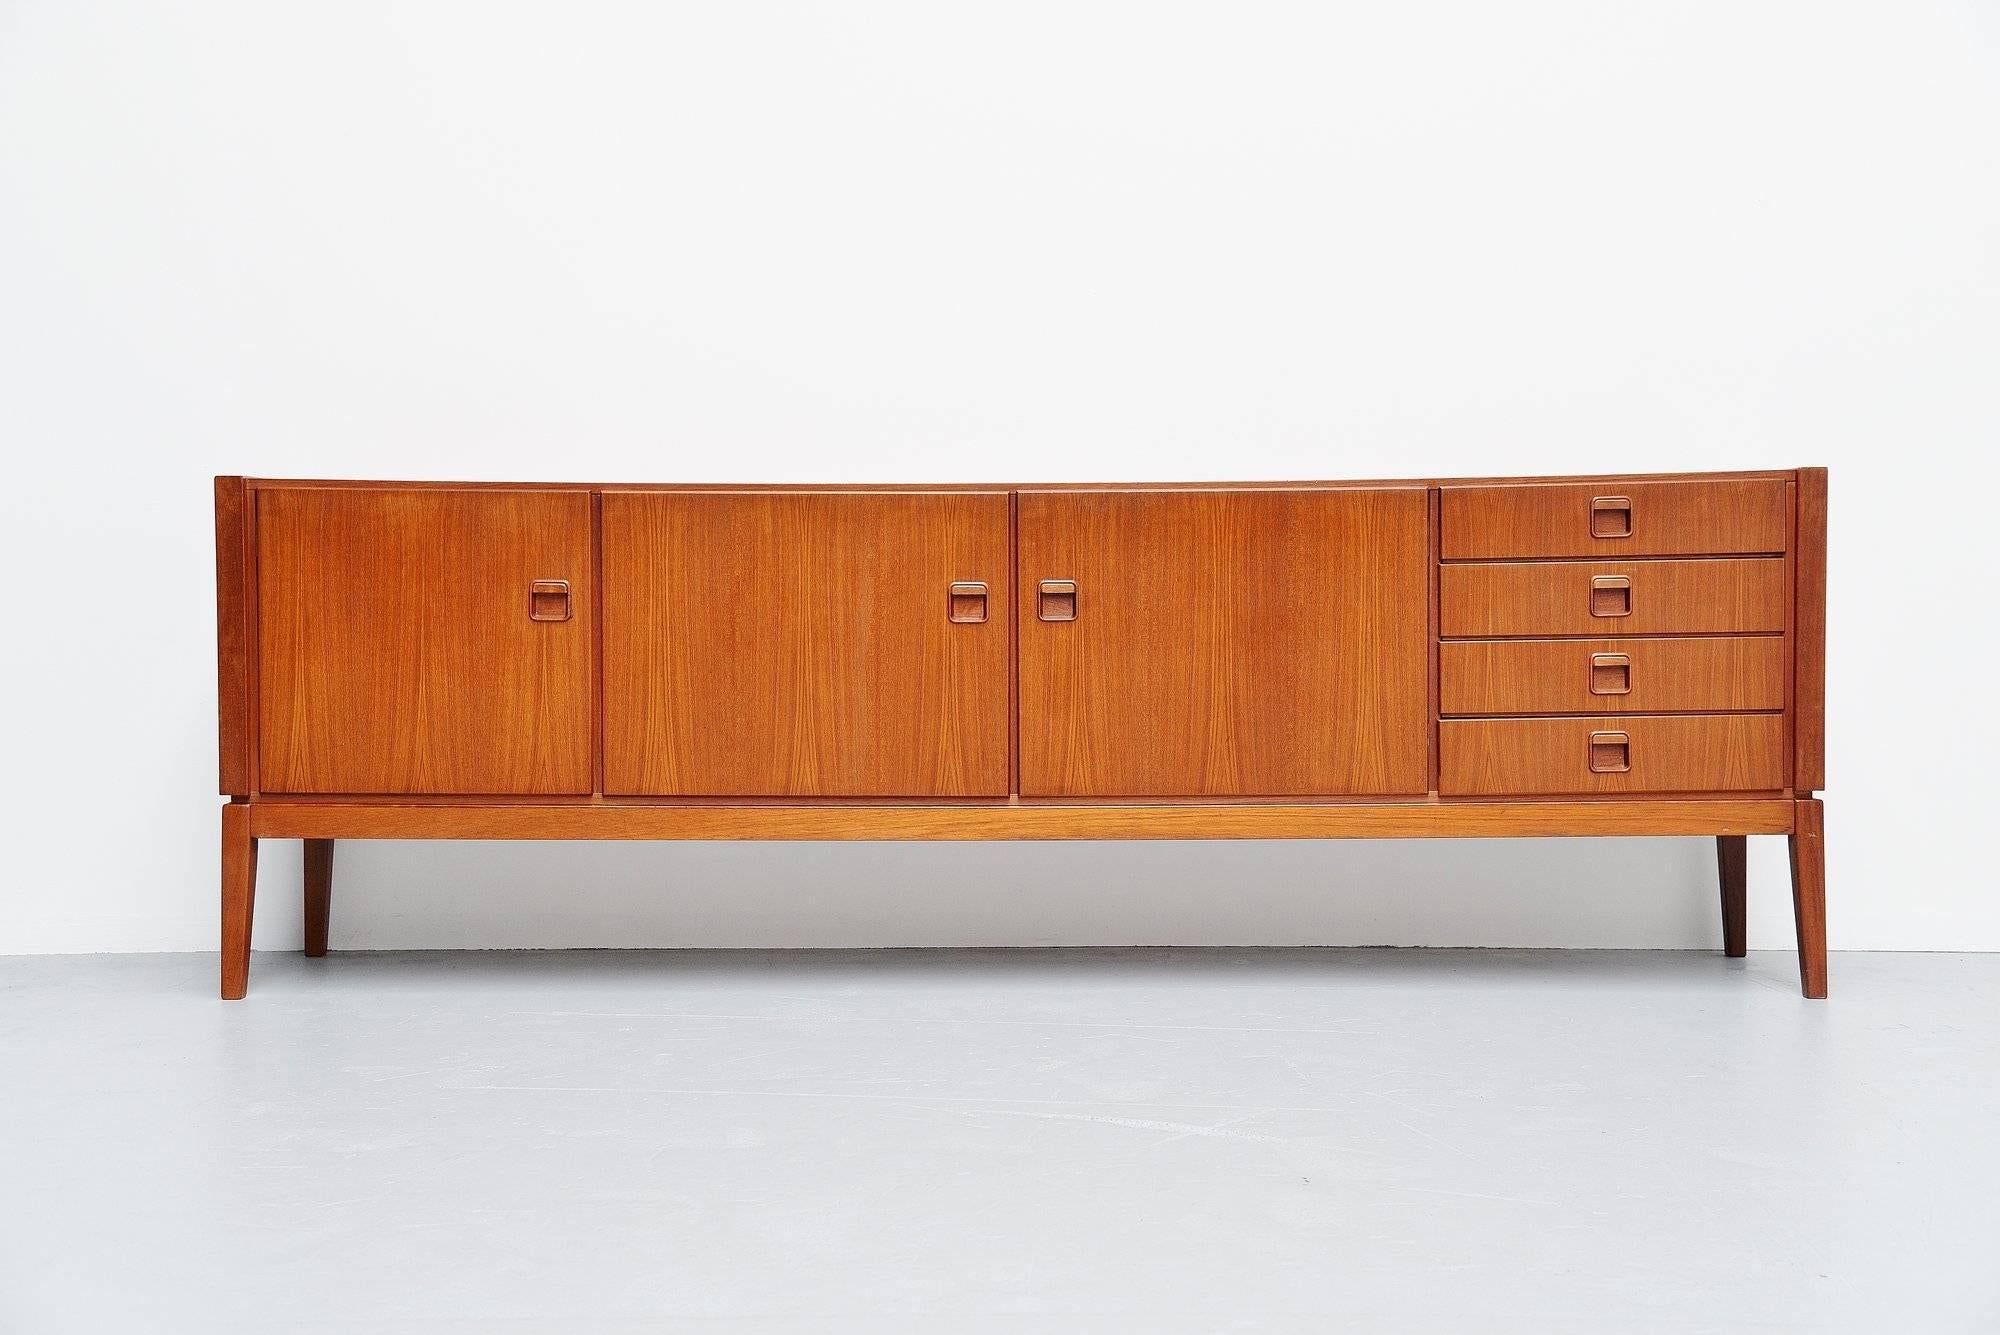 Nice teak wooden sideboard designed by Rudolf Bernd Glatzel and manufactured by Fristho Franeker, Holland, 1960. The sideboard has three folding doors with shelves behind on the left and on the right there are four drawers. The sideboard is in